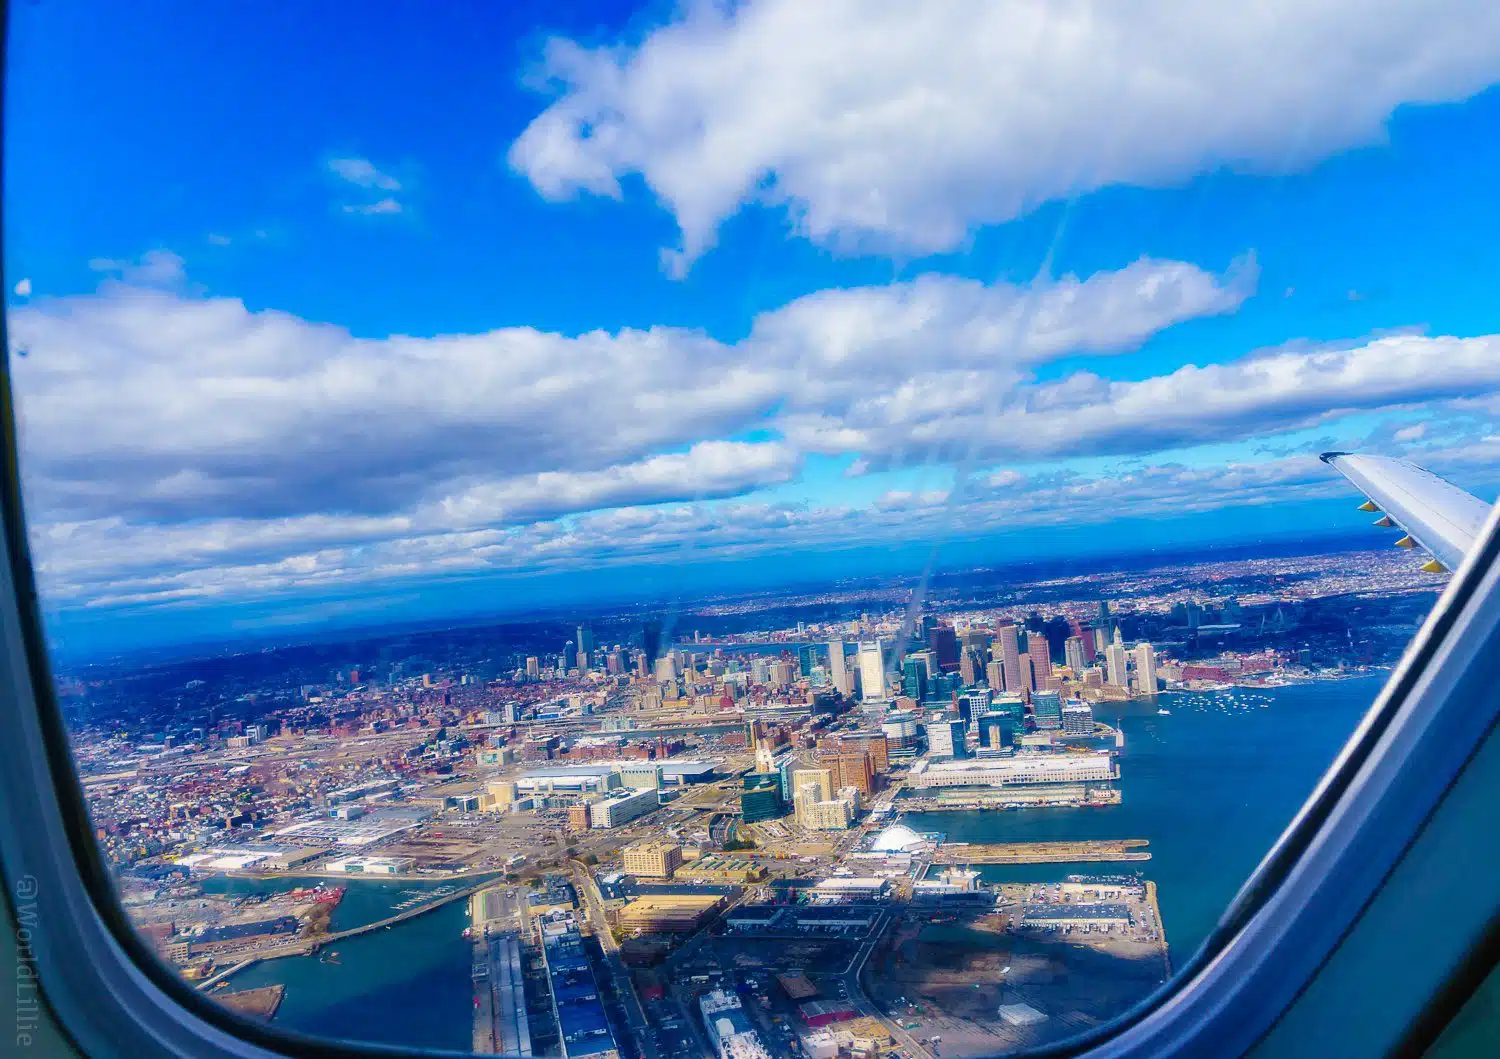 Boston, you look lovely from on Earth as well as above!